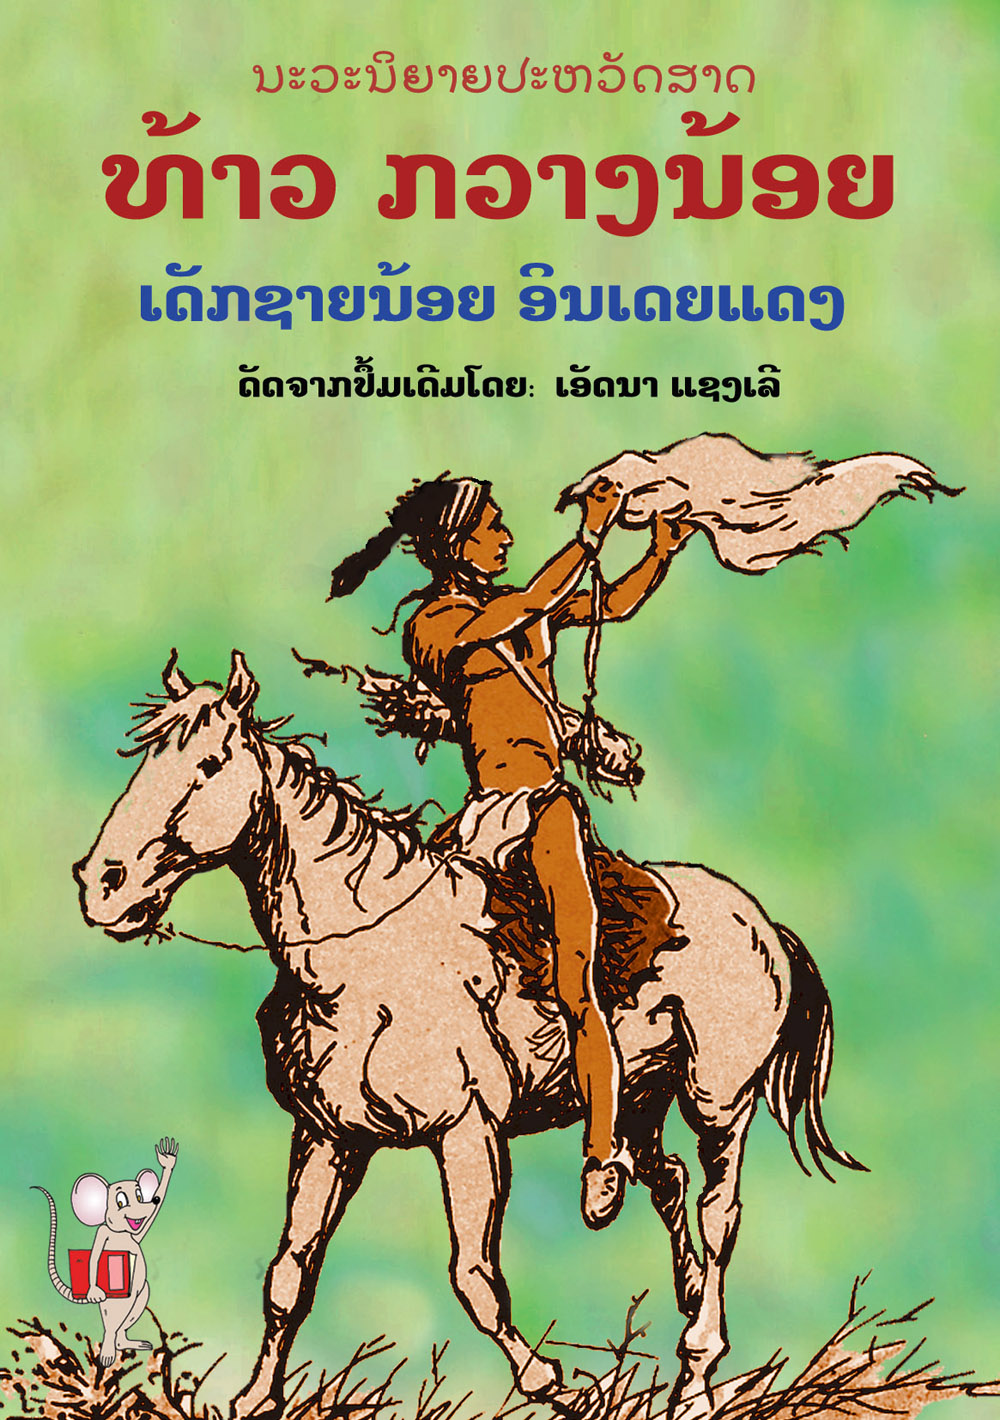 Little Deer large book cover, published in Lao language